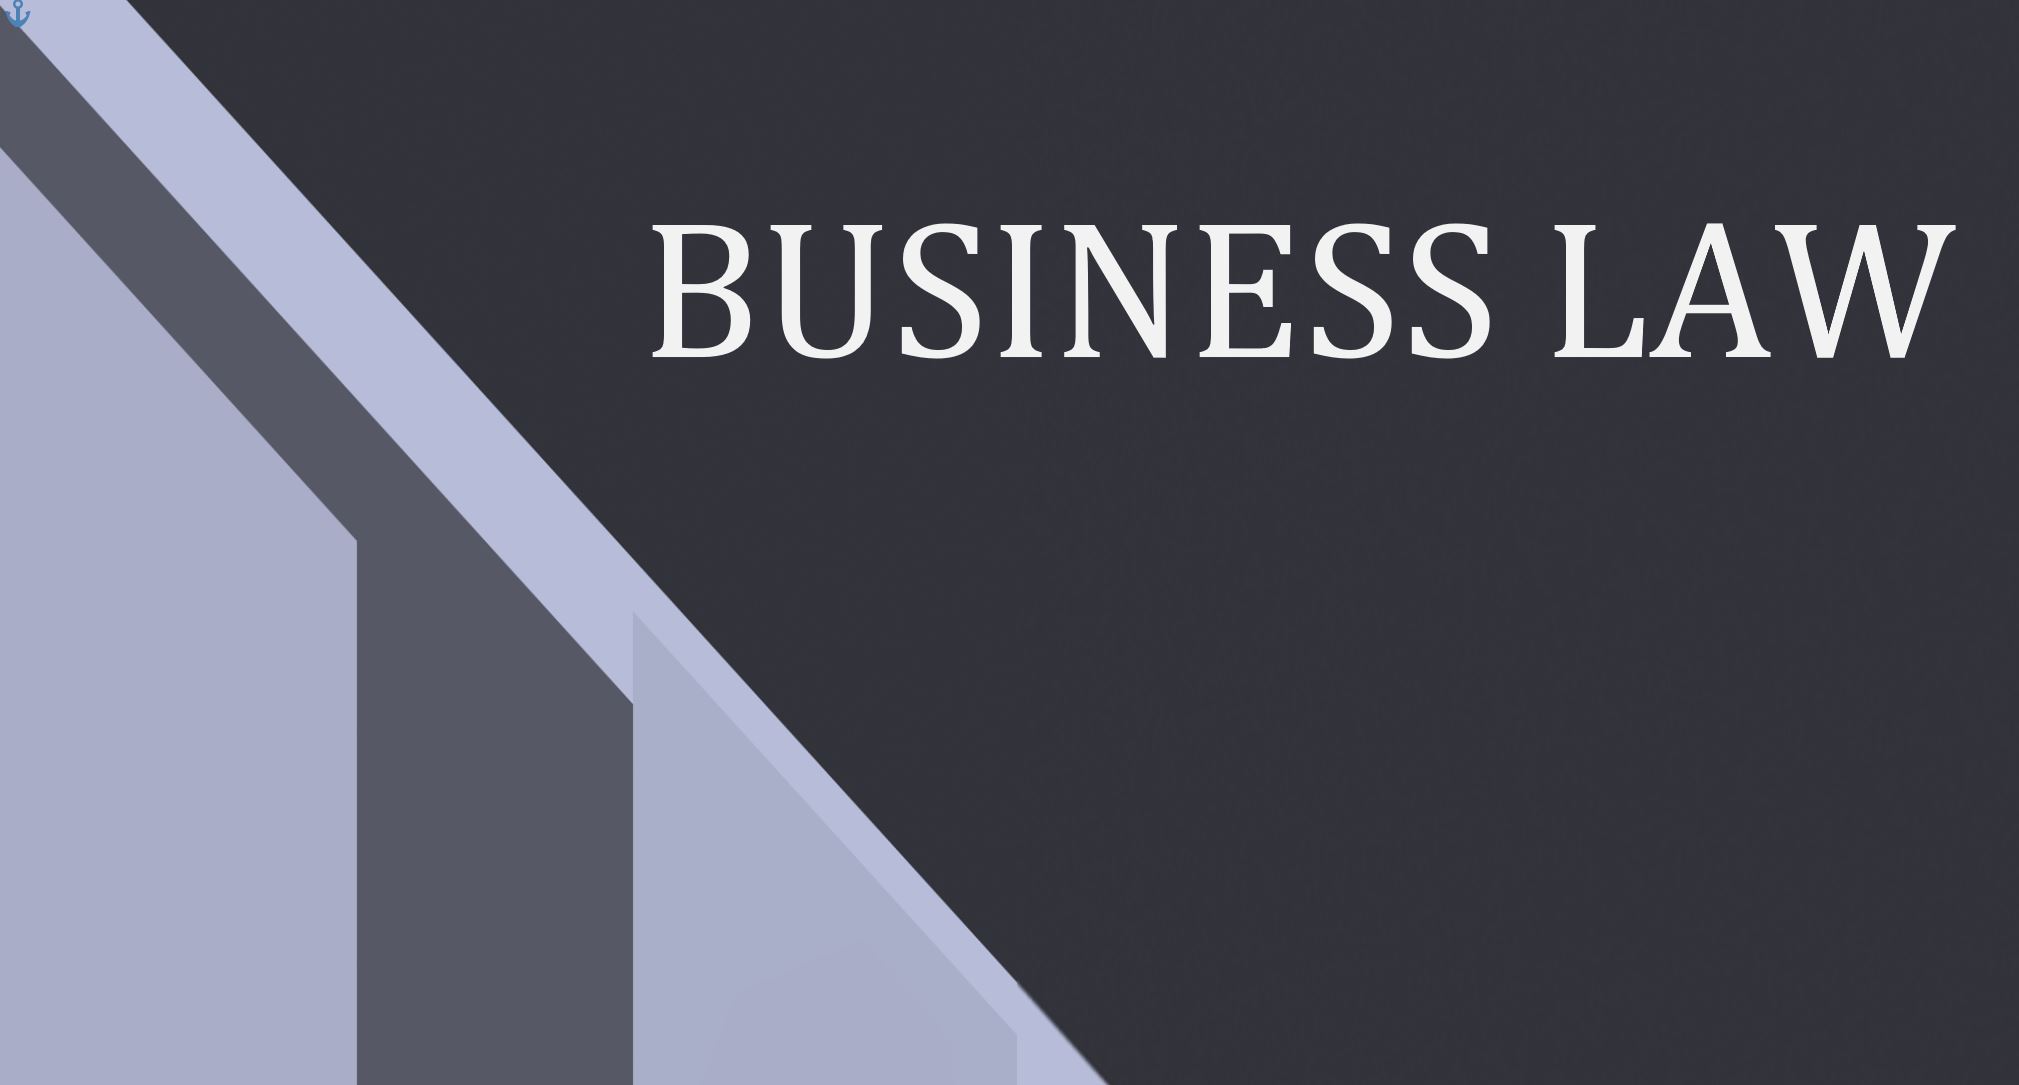 A5: Business Law